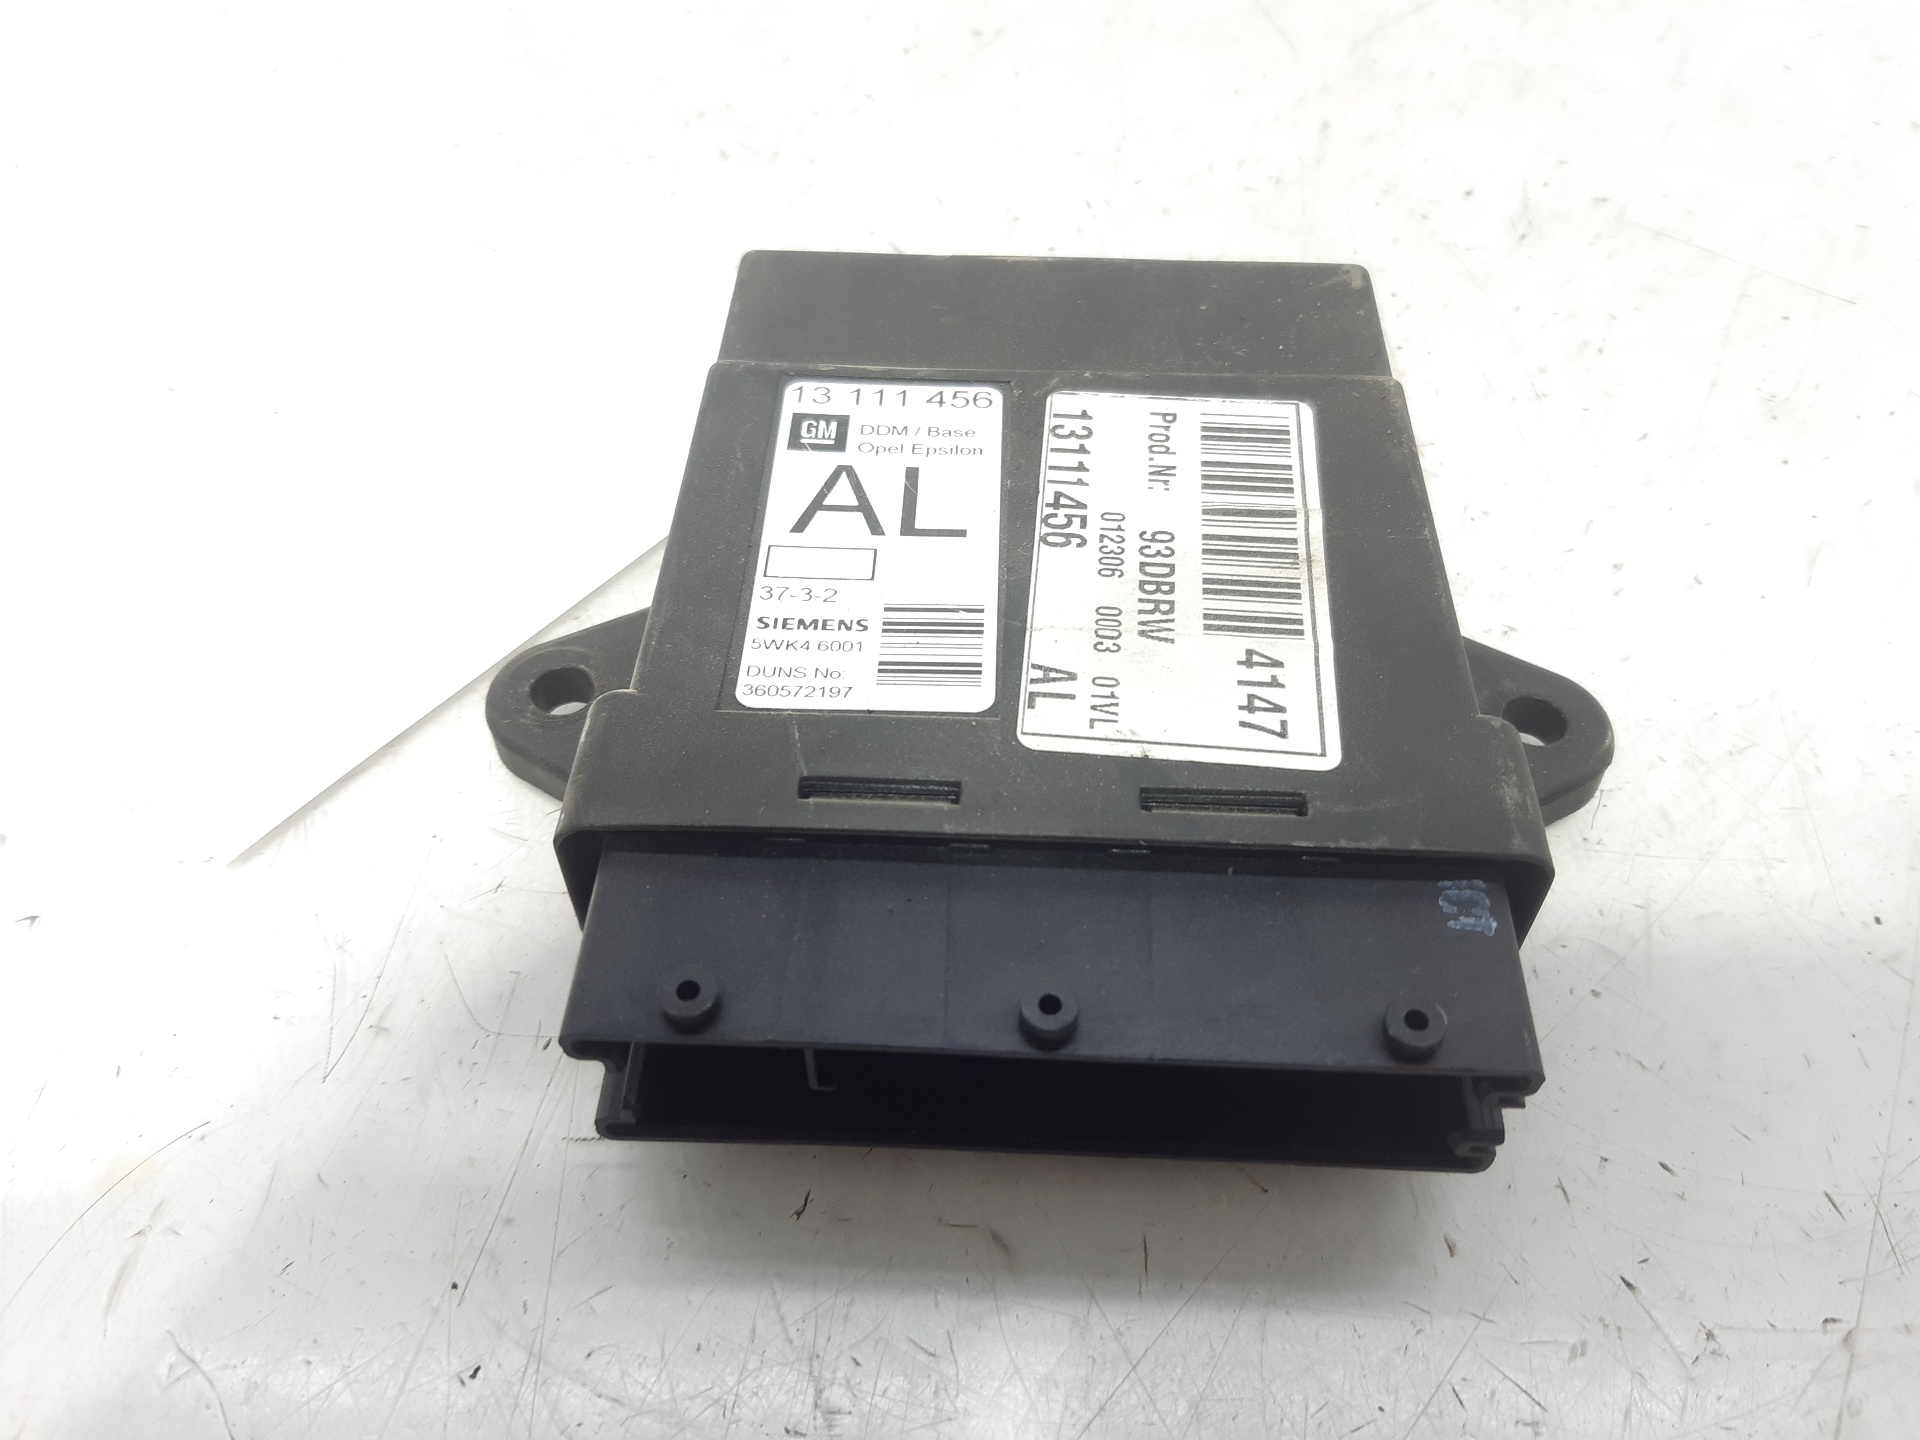 OPEL Vectra C (2002-2005) Other Control Units 13111456 18734965